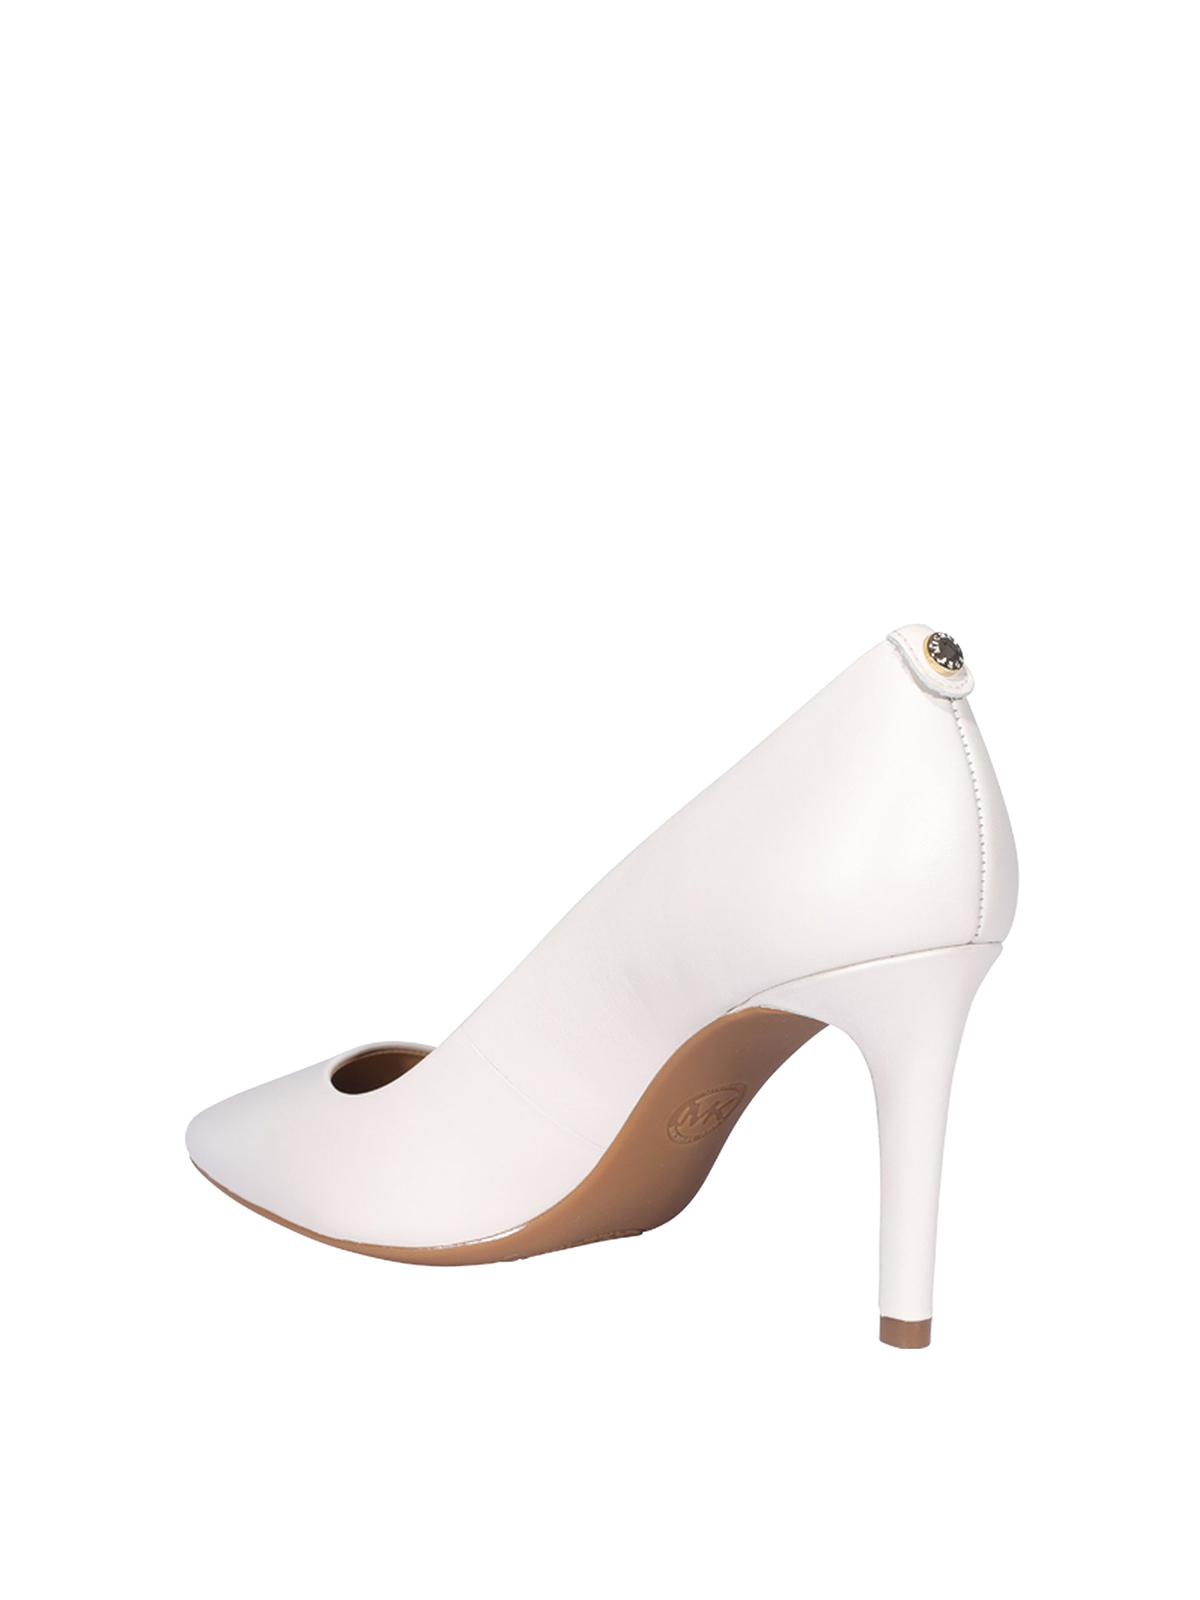 MICHAEL Michael Kors Beverly Leather Mule Pump Optic White  Women shoes  White slip on shoes Shoes